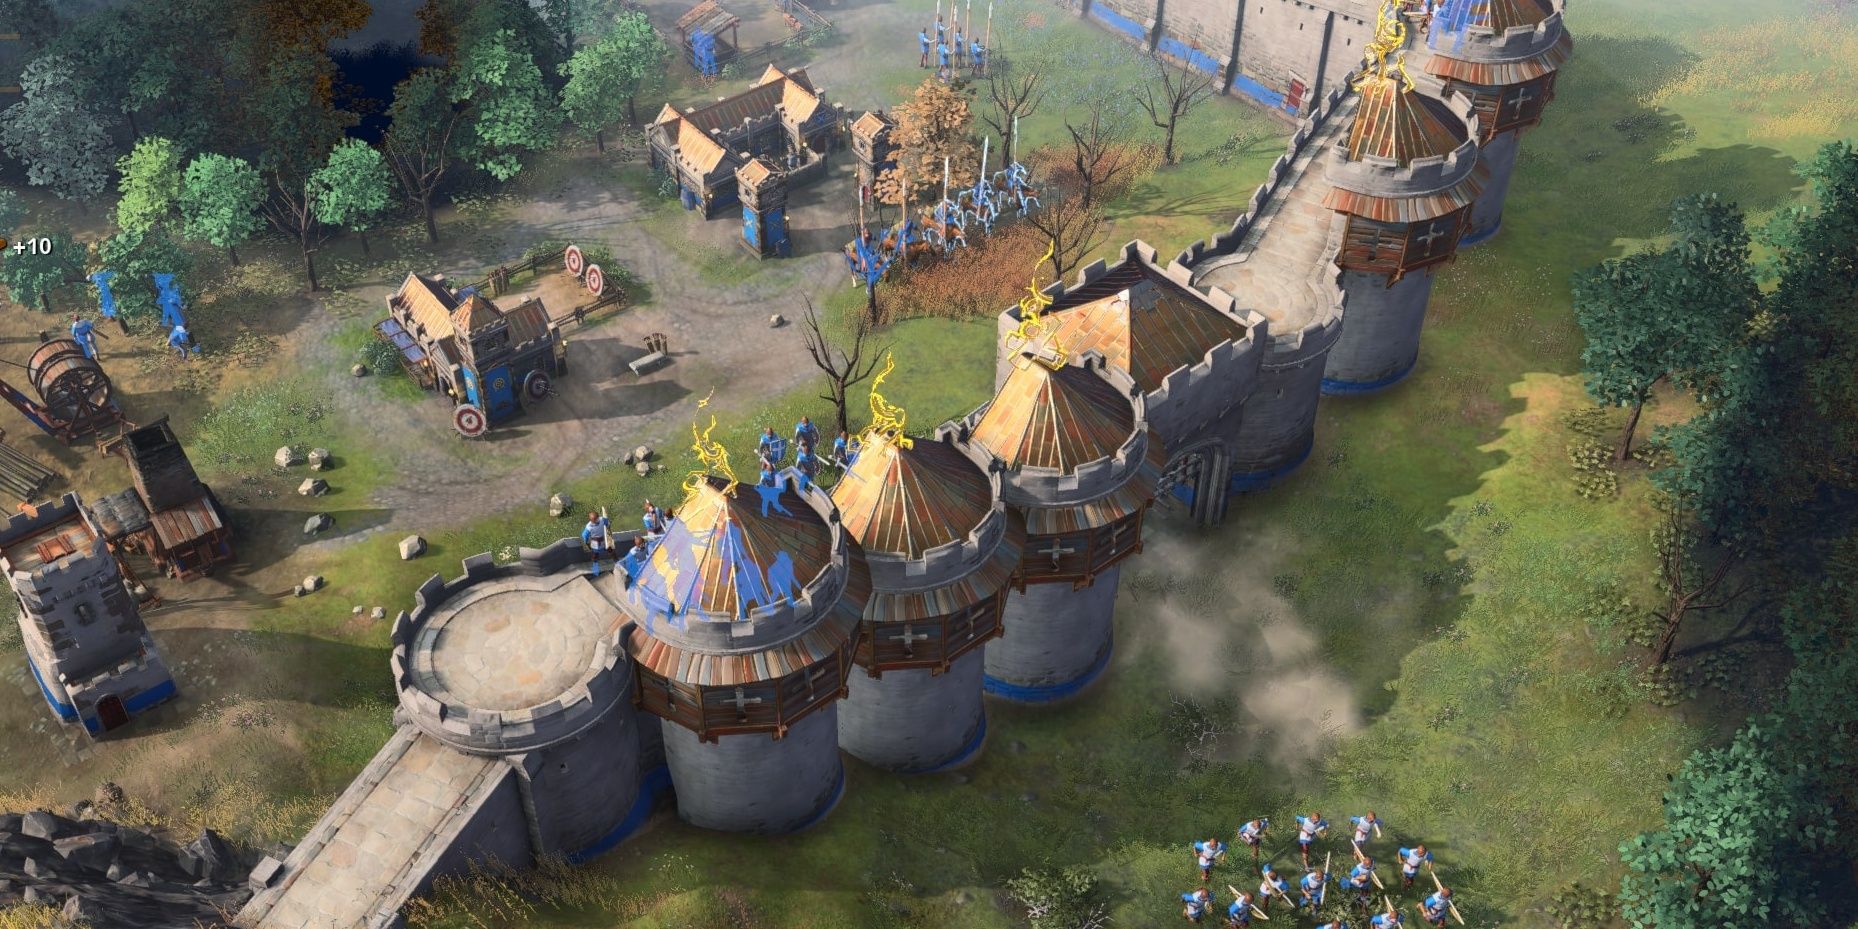 English defenses in Age of Empires IV